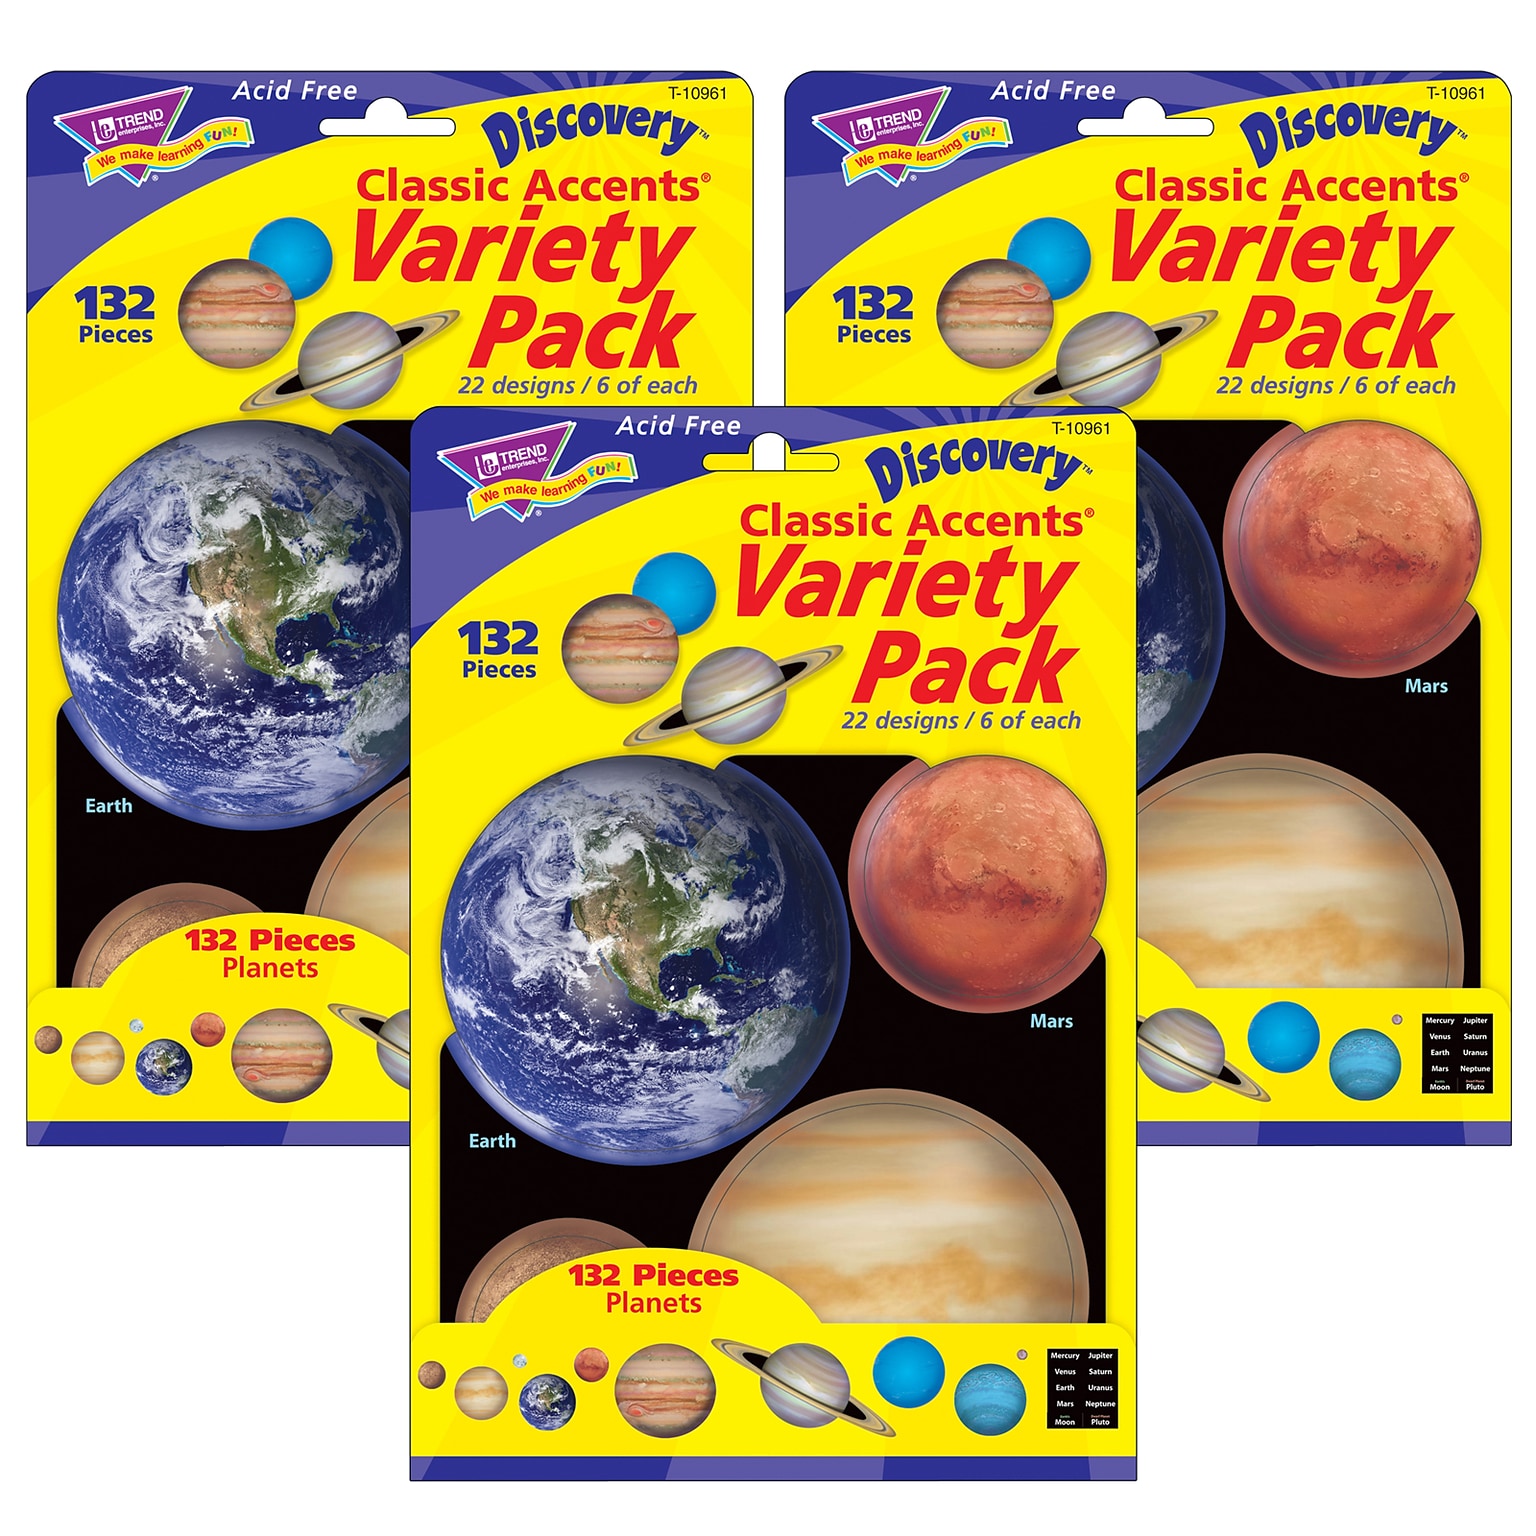 TREND Planets Classic Accents Variety Pack, 132 Pieces Per Pack, 3 Packs (T-10961-3)